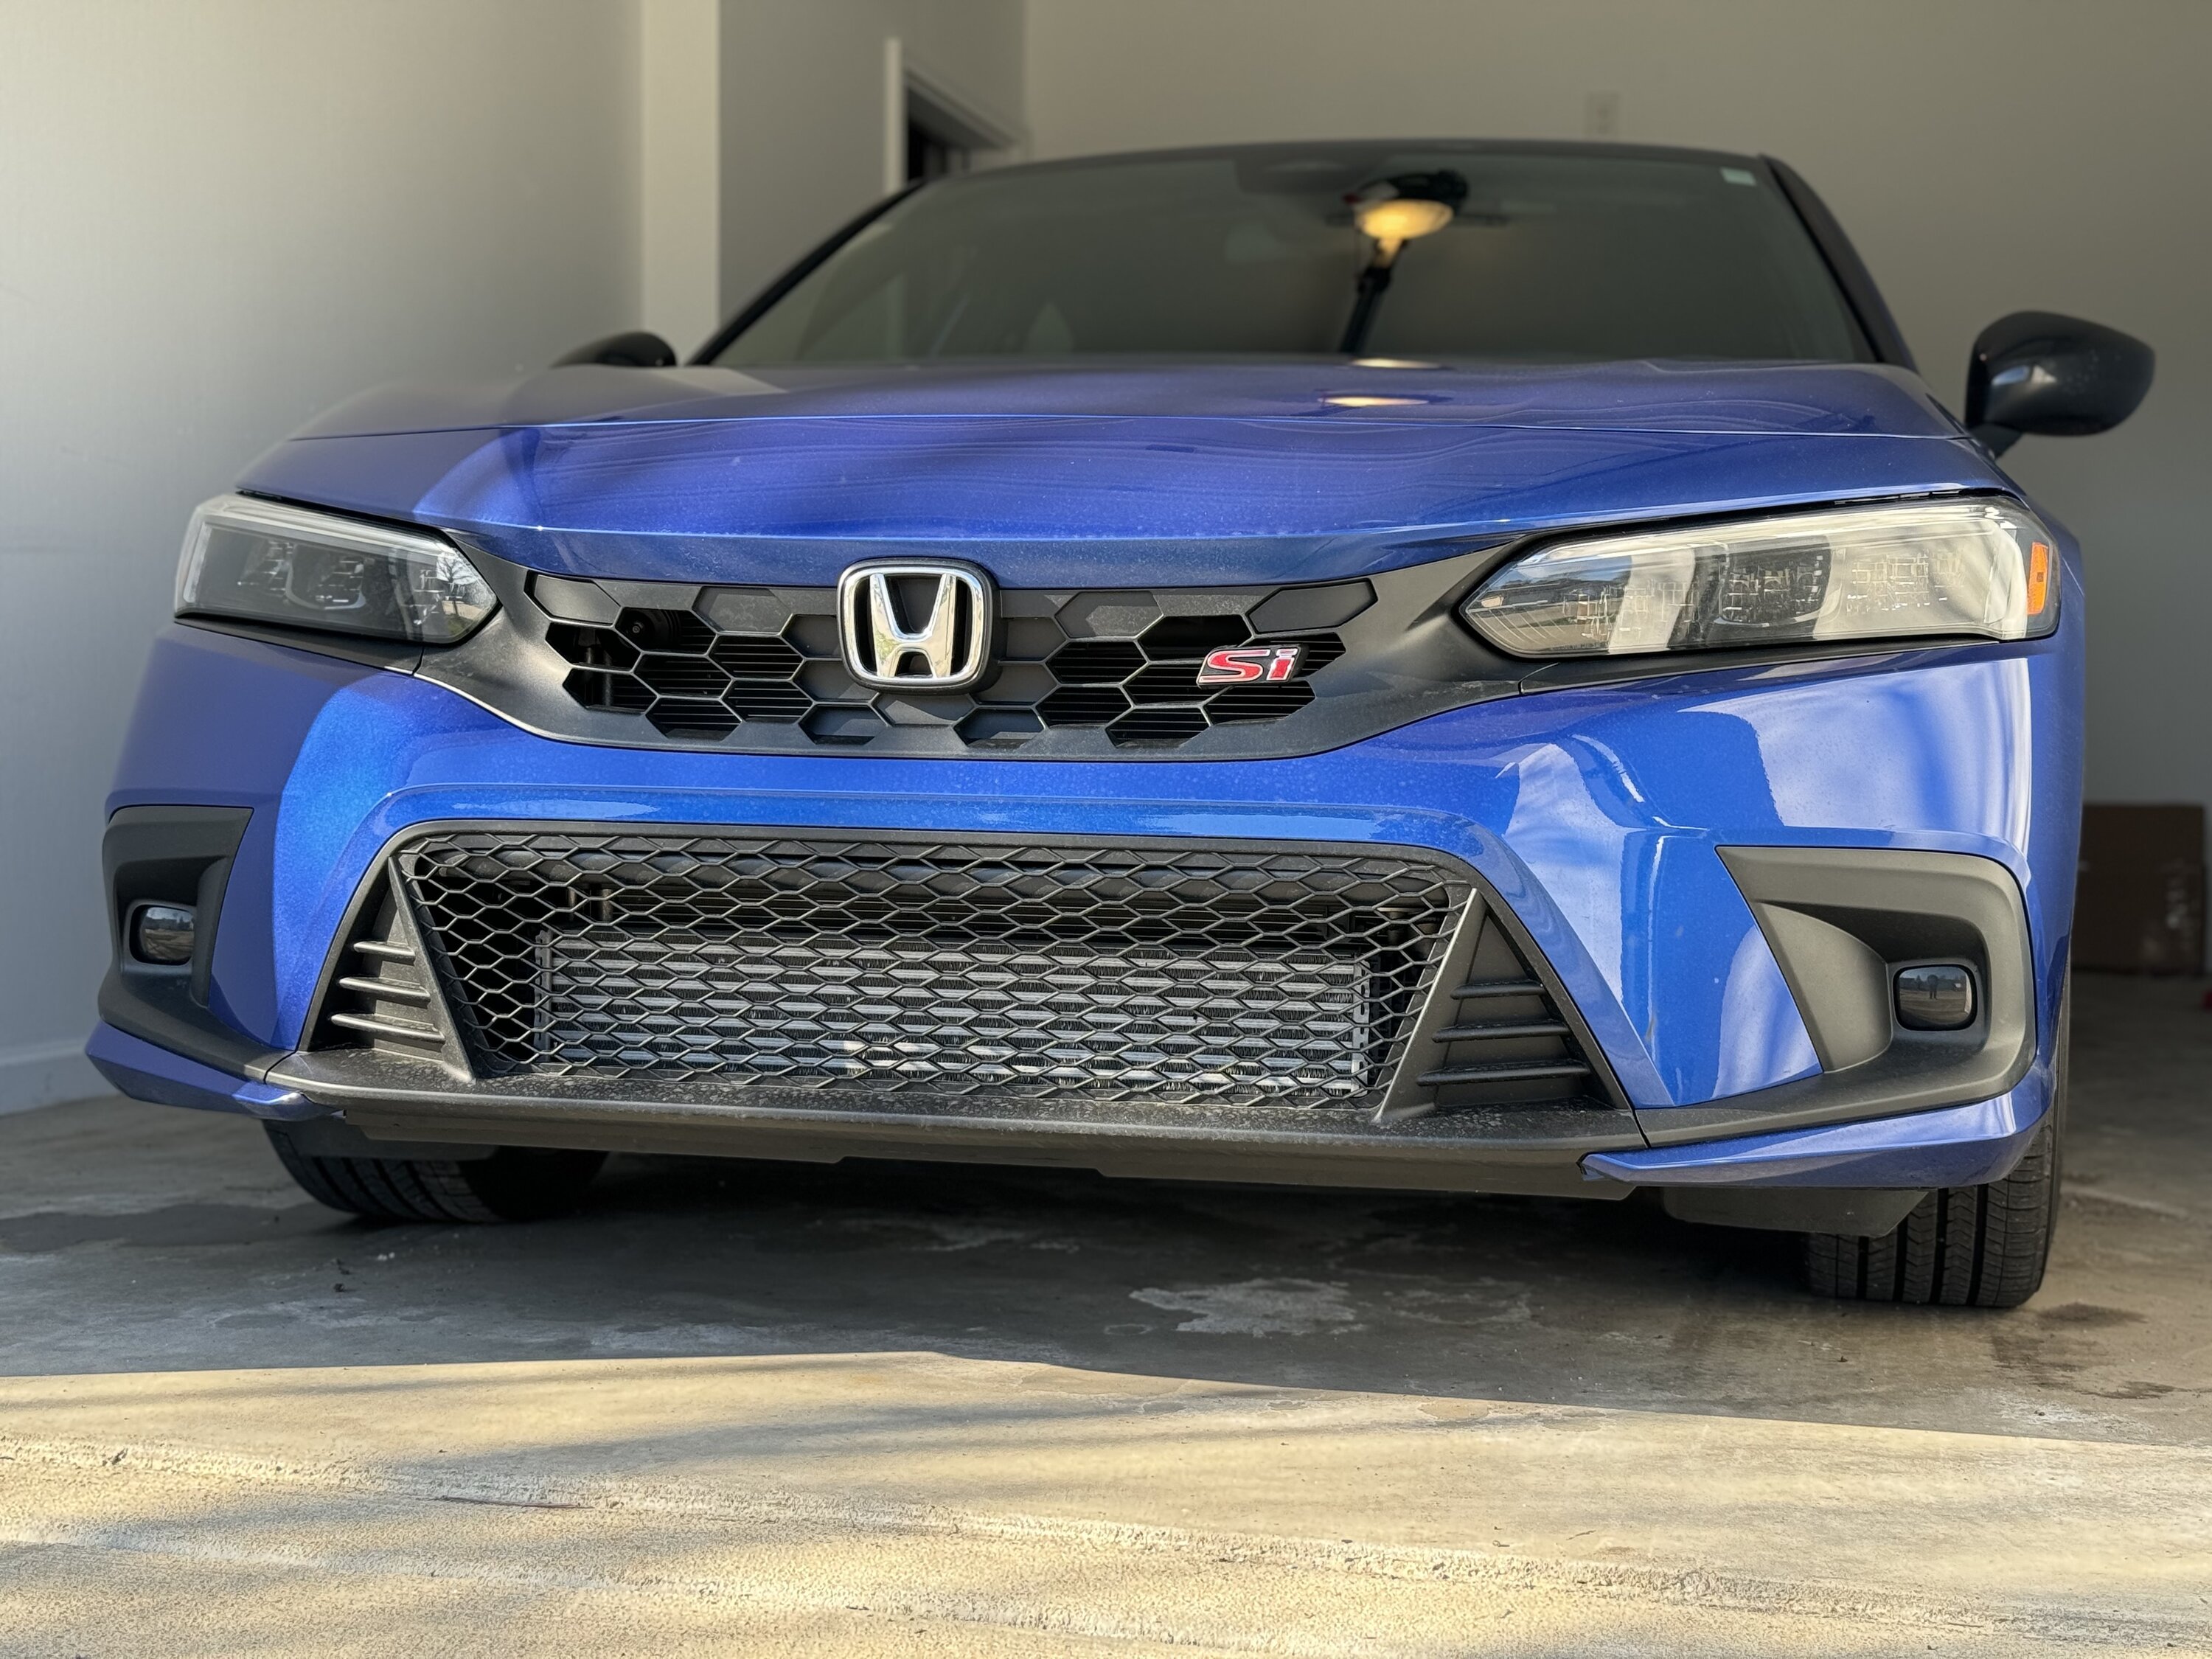 11th Gen Honda Civic 23 Civic SI Type R Style Front Grill Install! IMG_4726